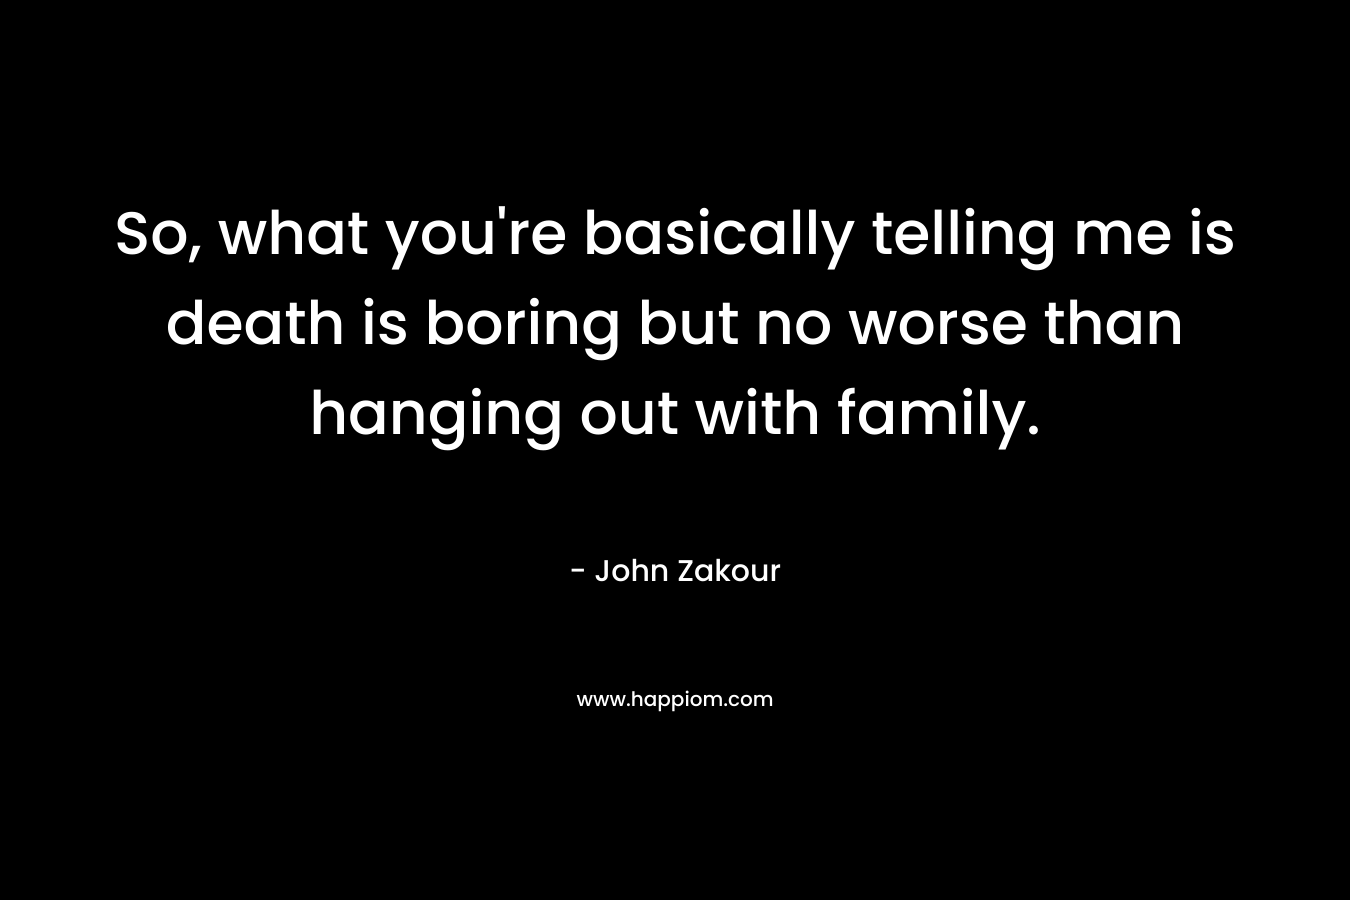 So, what you’re basically telling me is death is boring but no worse than hanging out with family. – John Zakour